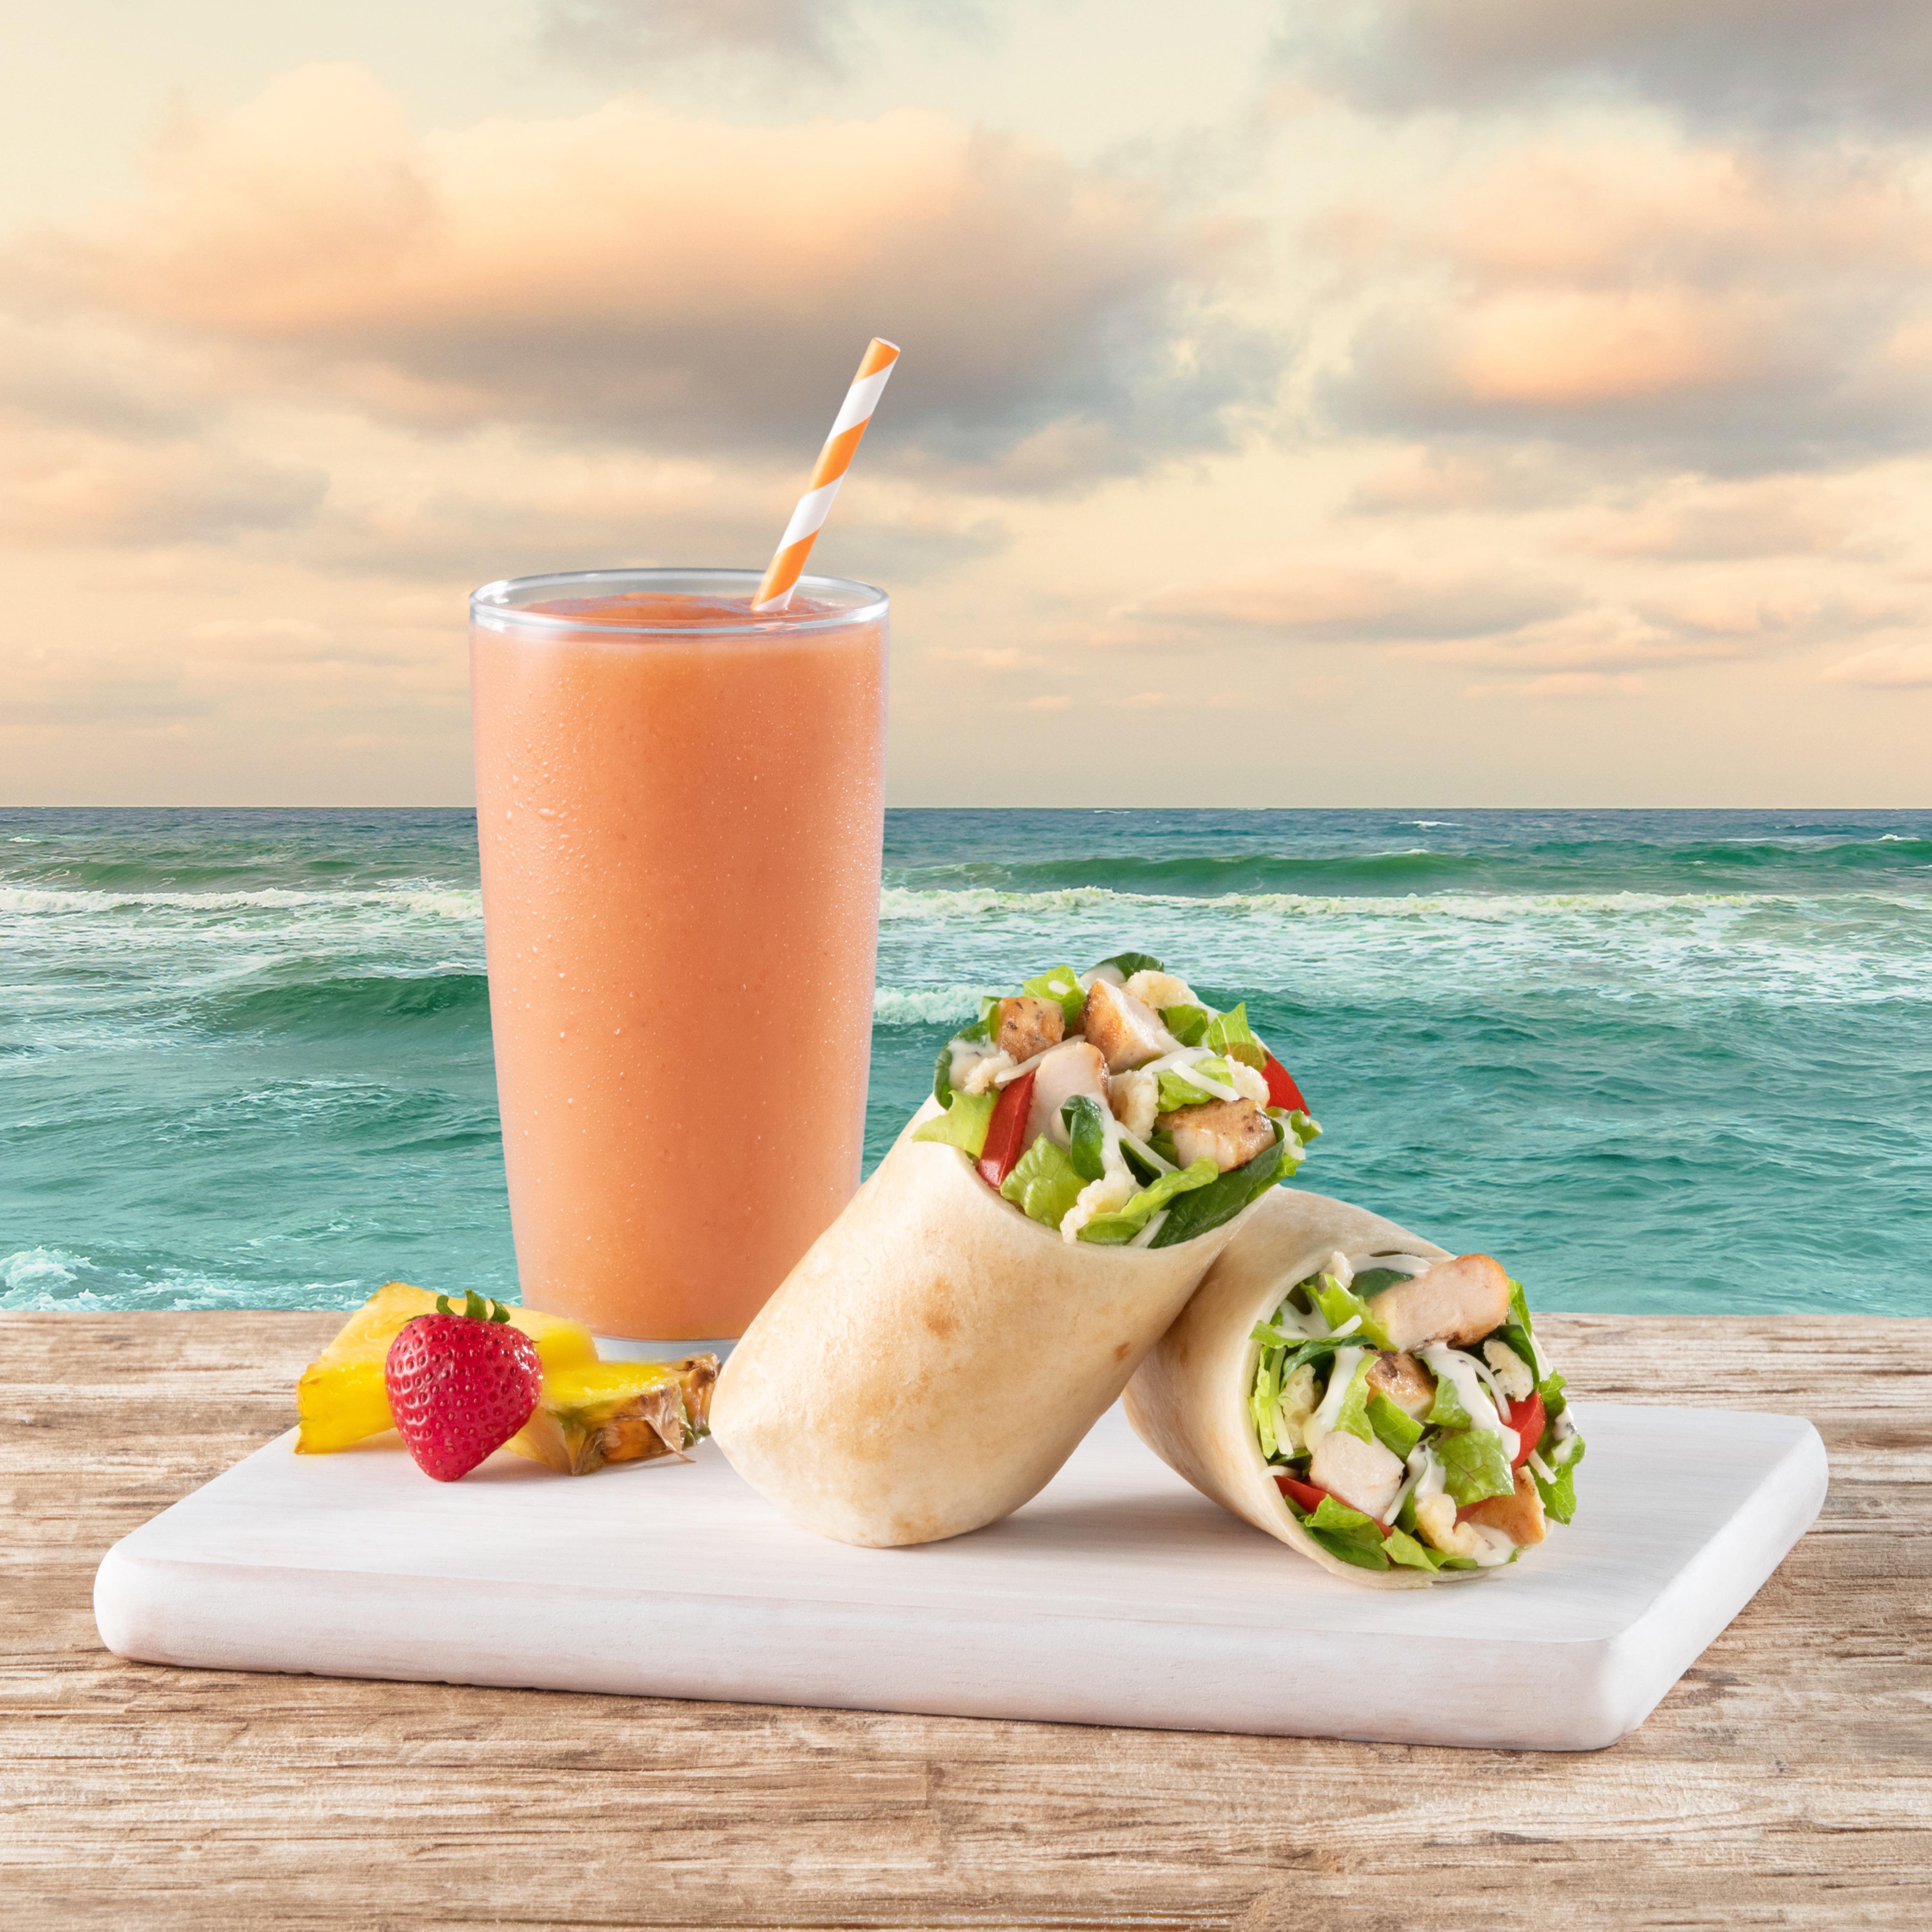 Tropical Smoothie Cafe Clawson (248)629-7041